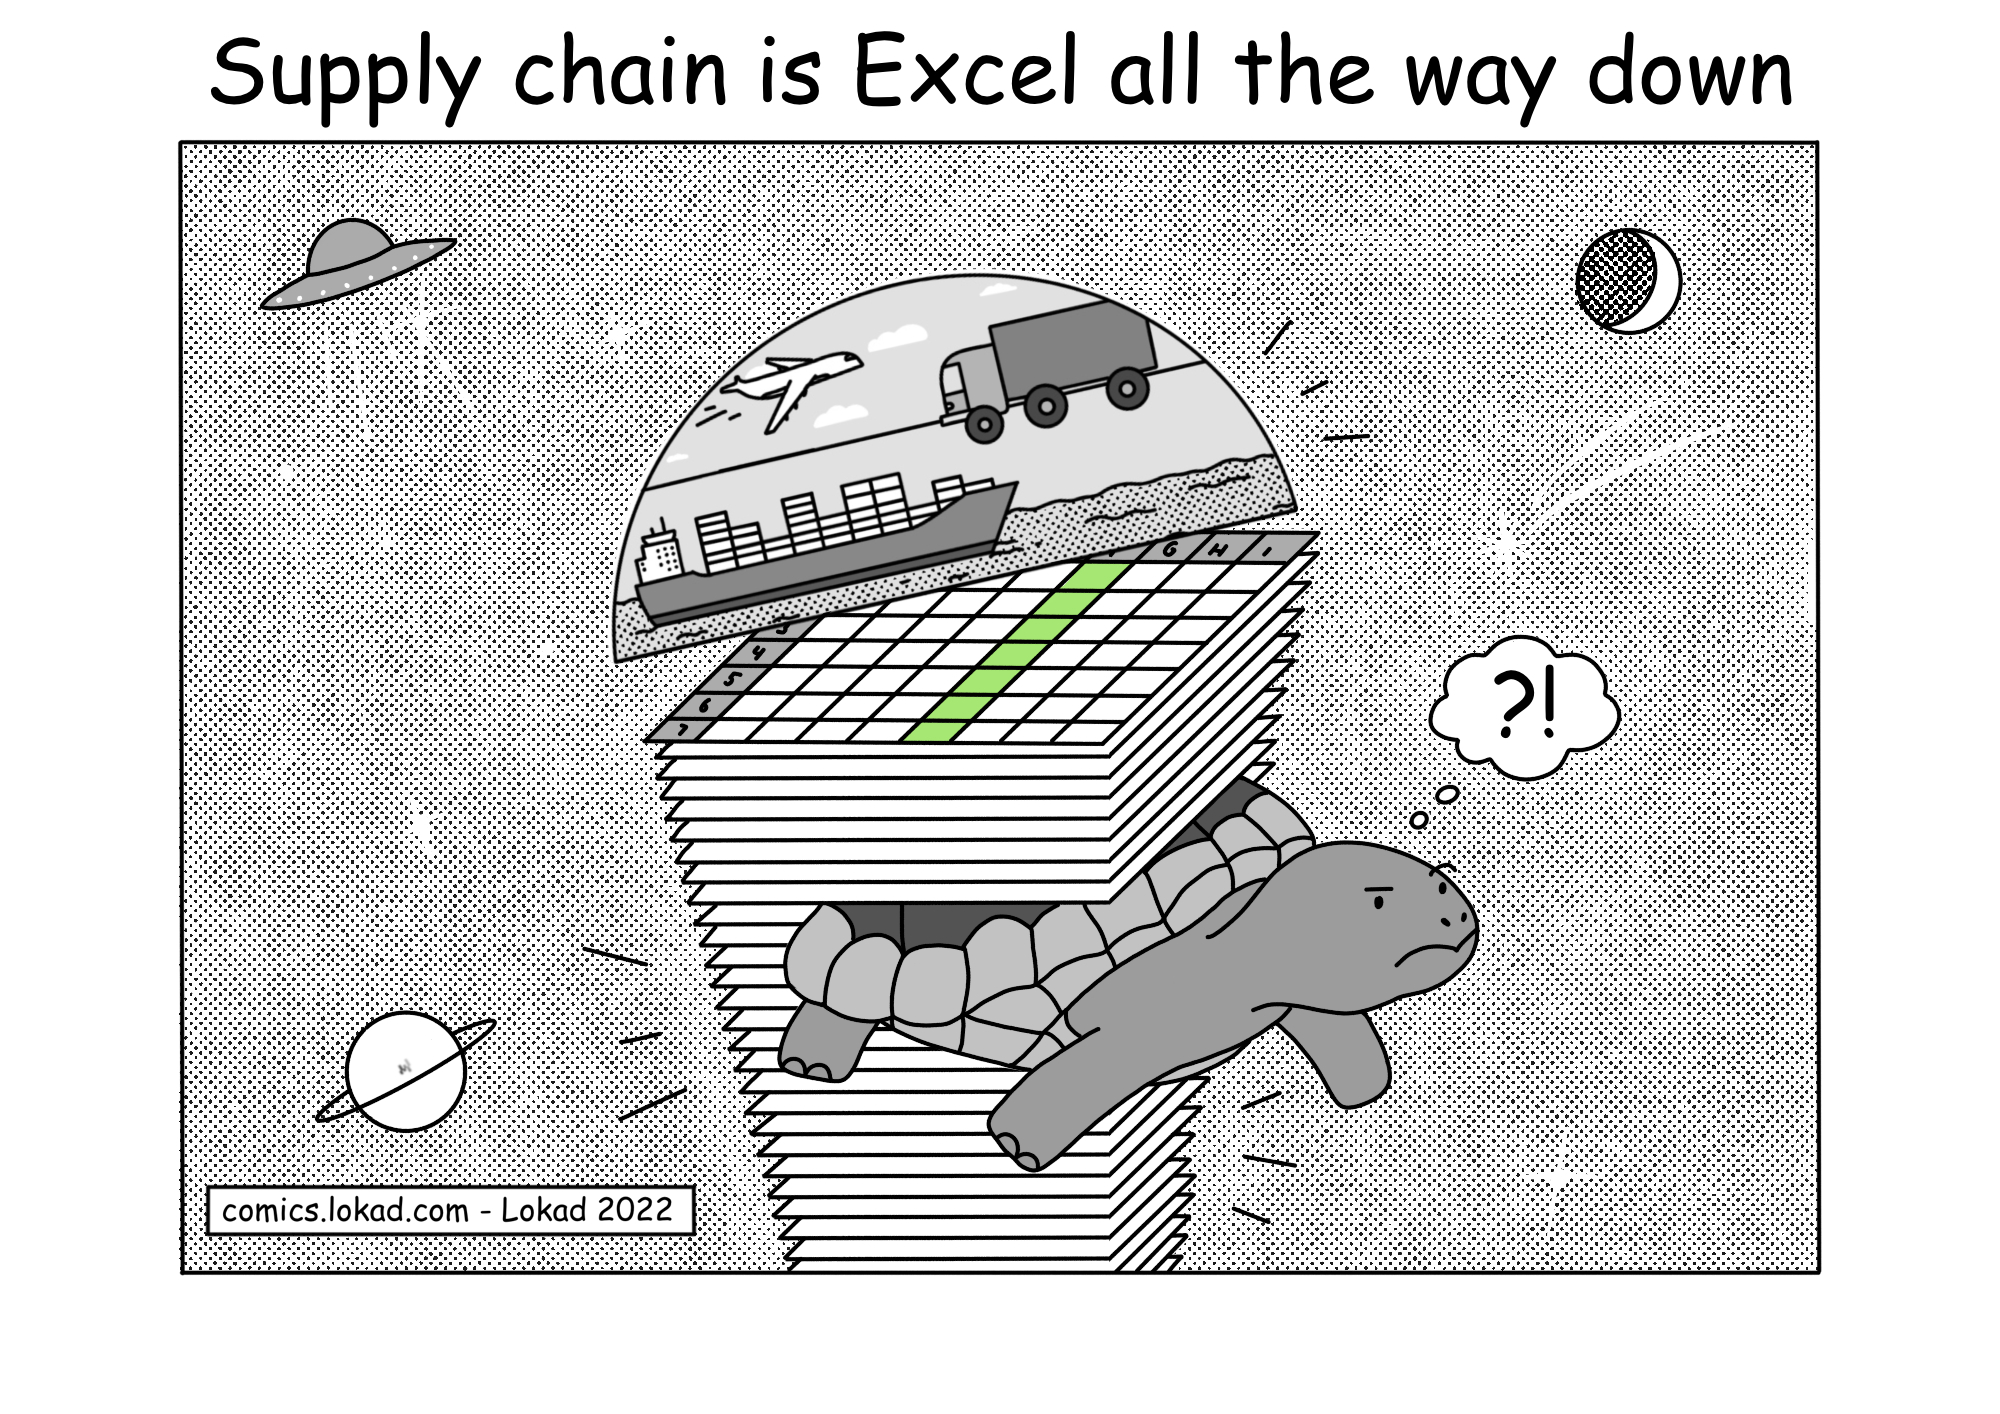 Supply chain is Excel all the way down